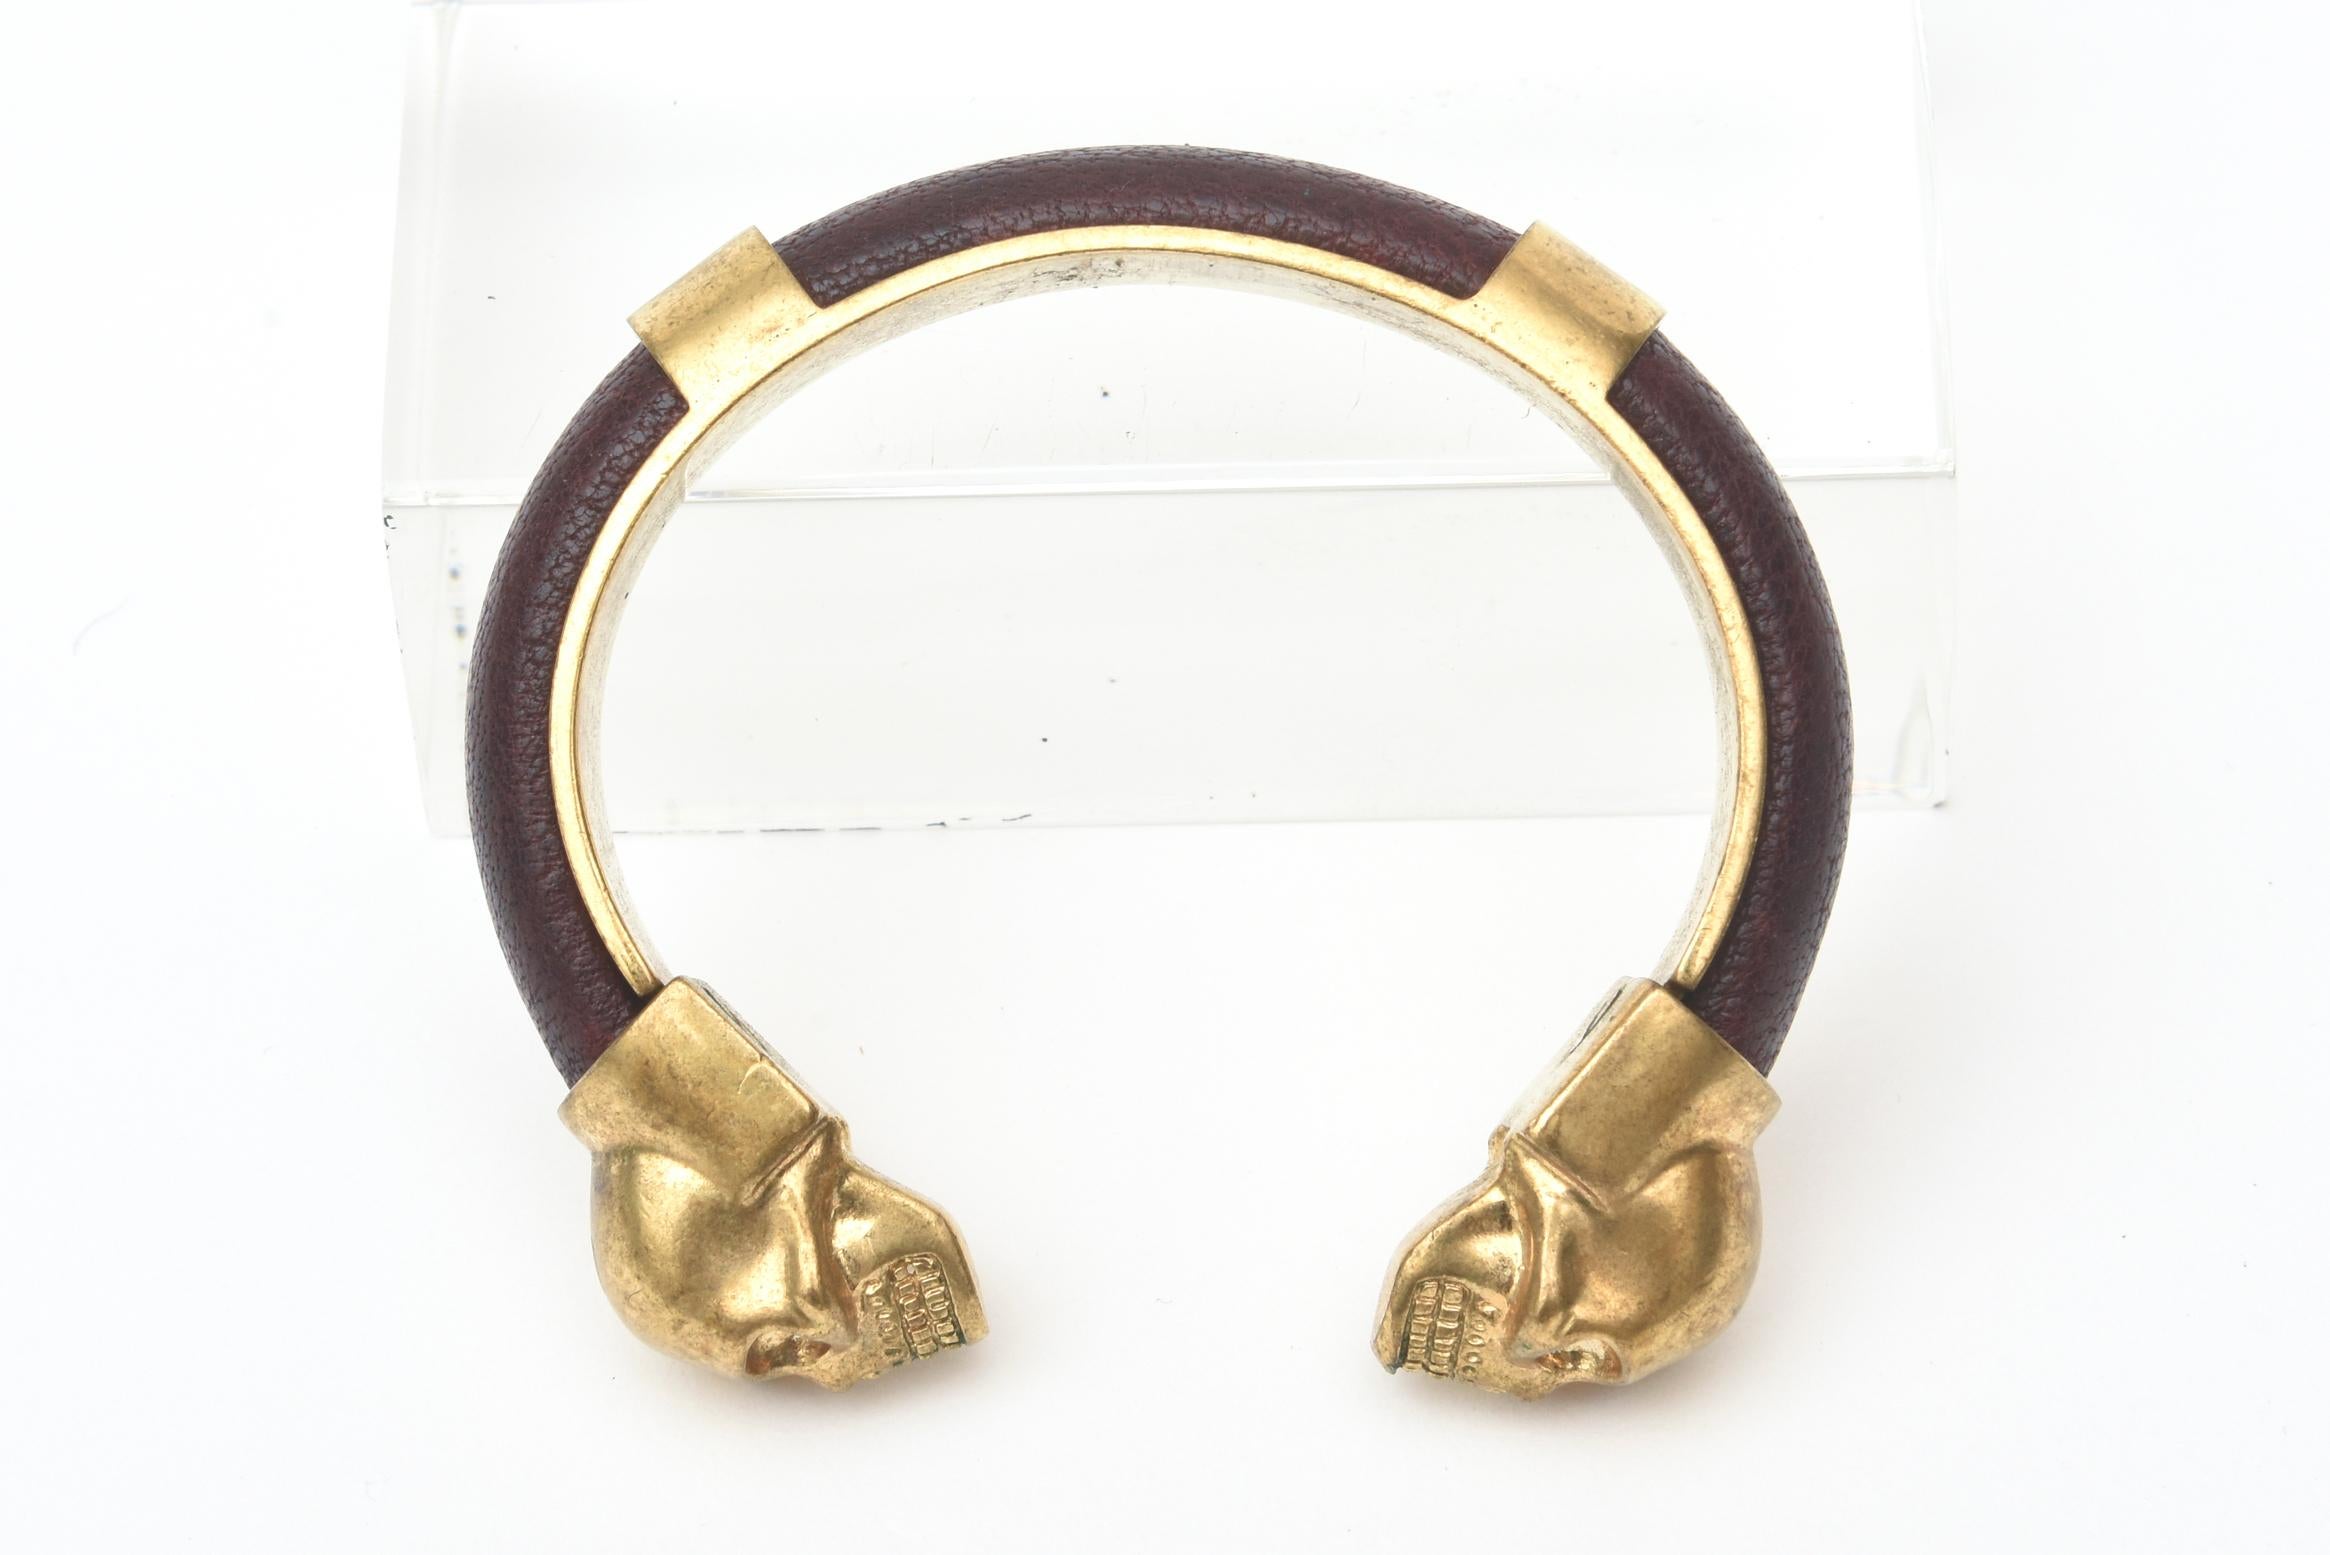 Alexander McQueen Gold Plated and Leather Skull Bracelet 7